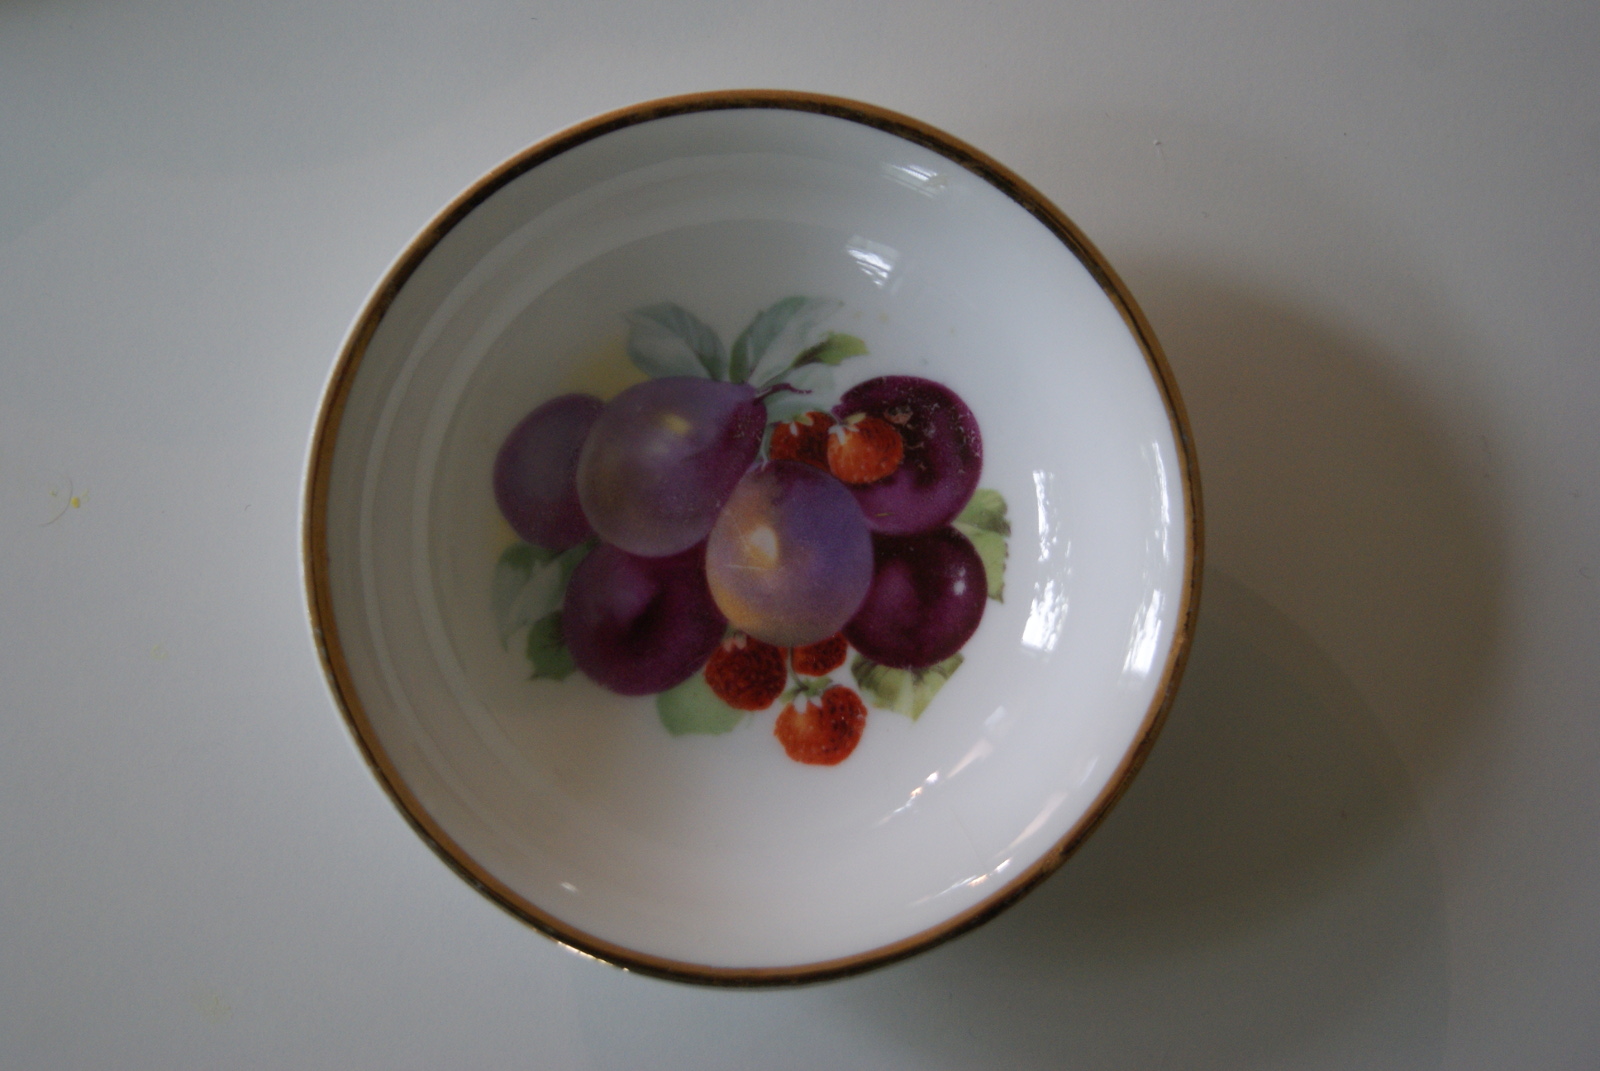 Porsgrund dessert bowl with fruits - plums and strawberries